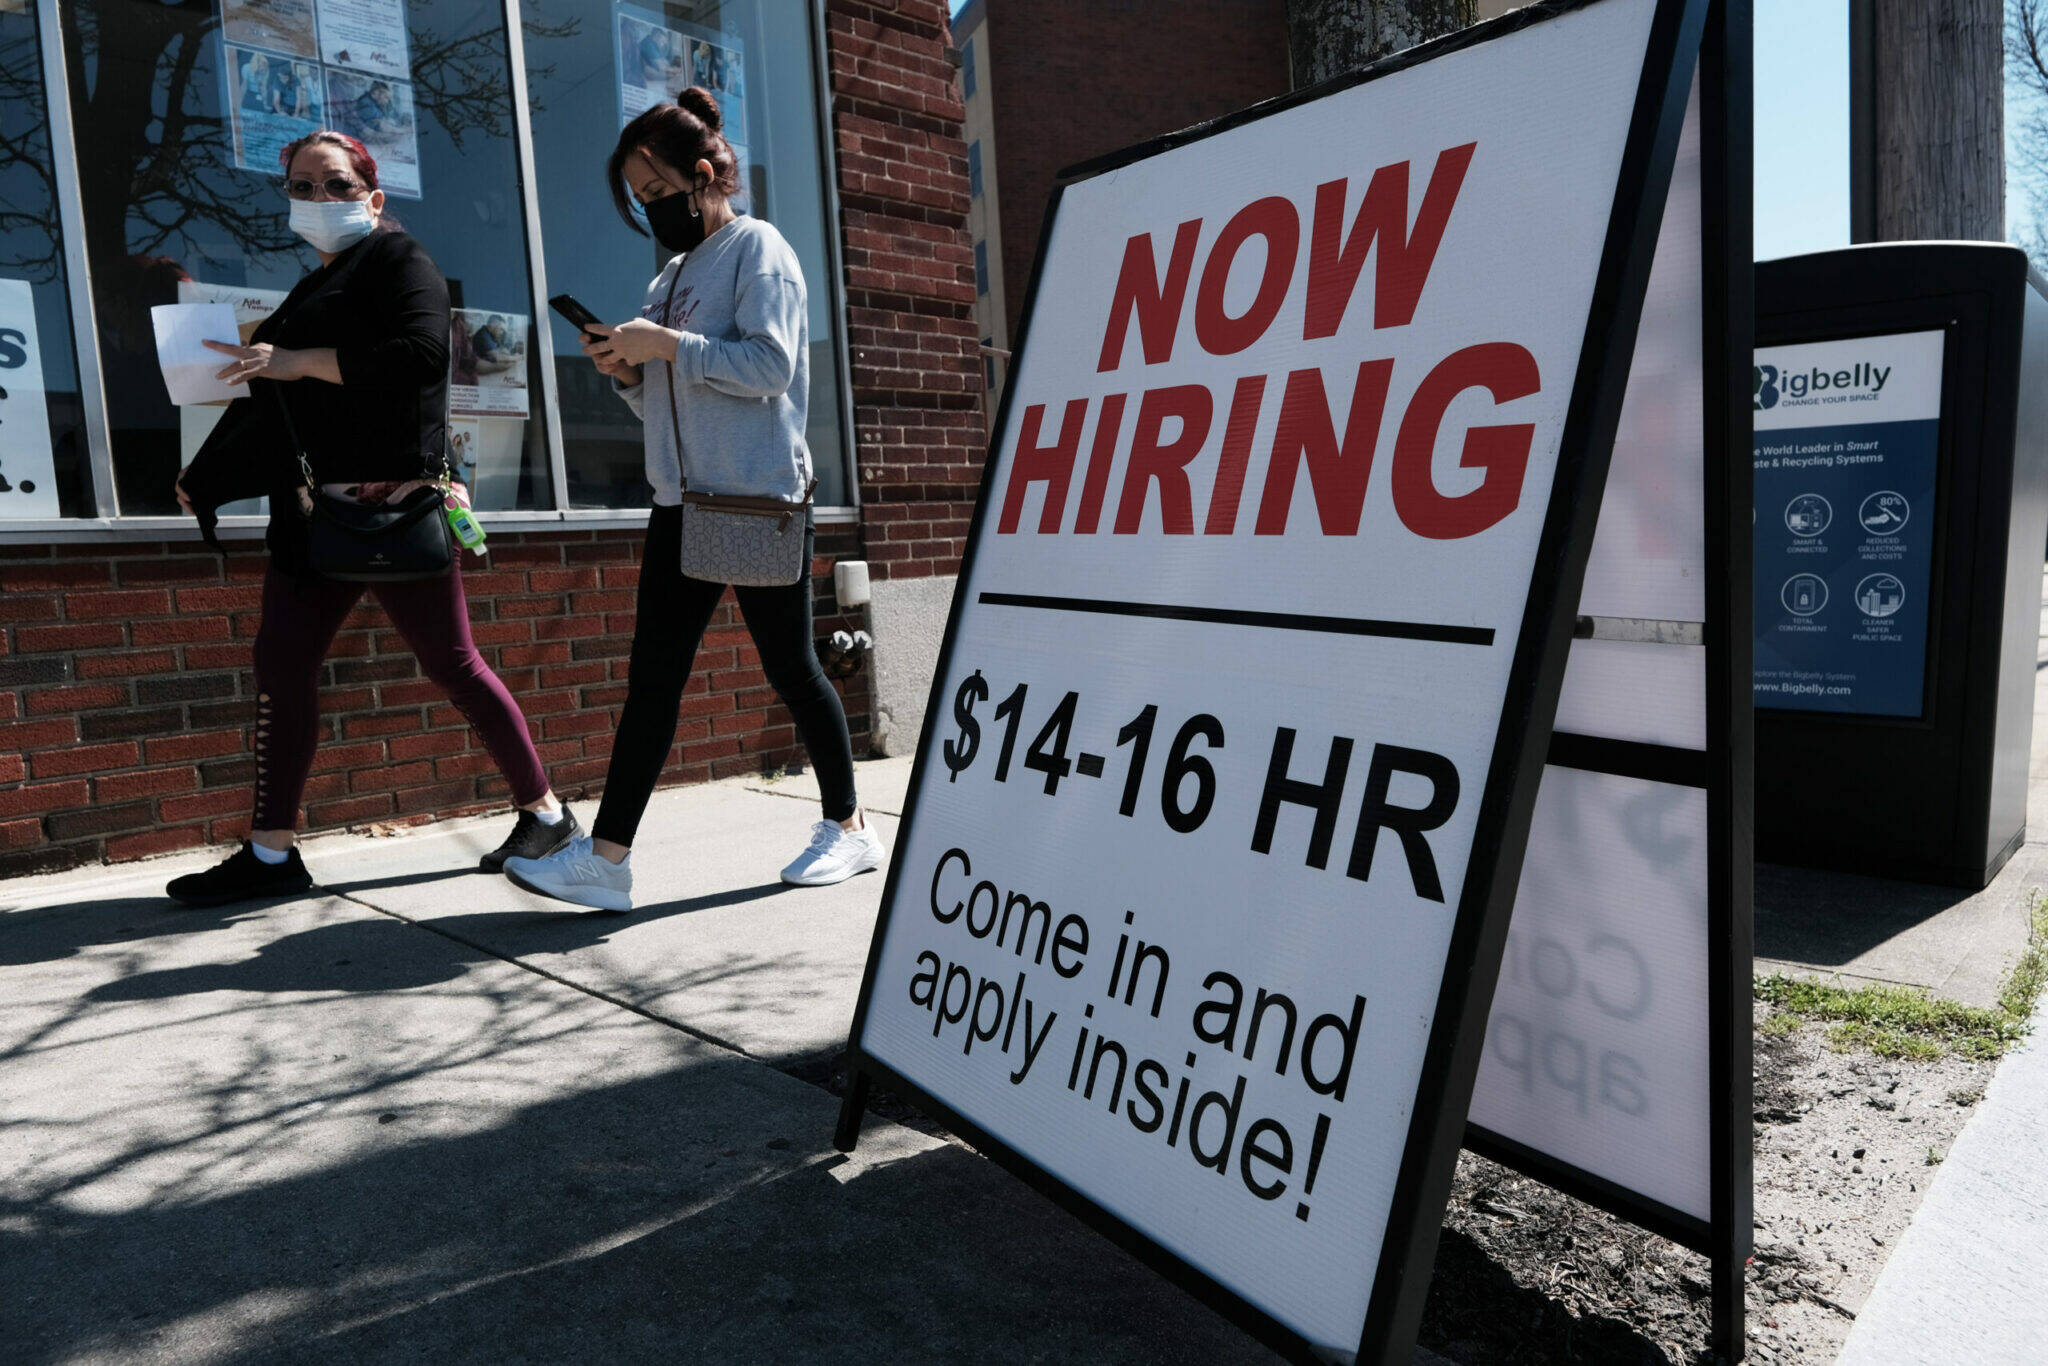 A company advertises a help wanted sign on April 9, 2021 in Pawtucket, Rhode Island. (Photo by Spencer Platt/Getty Images)